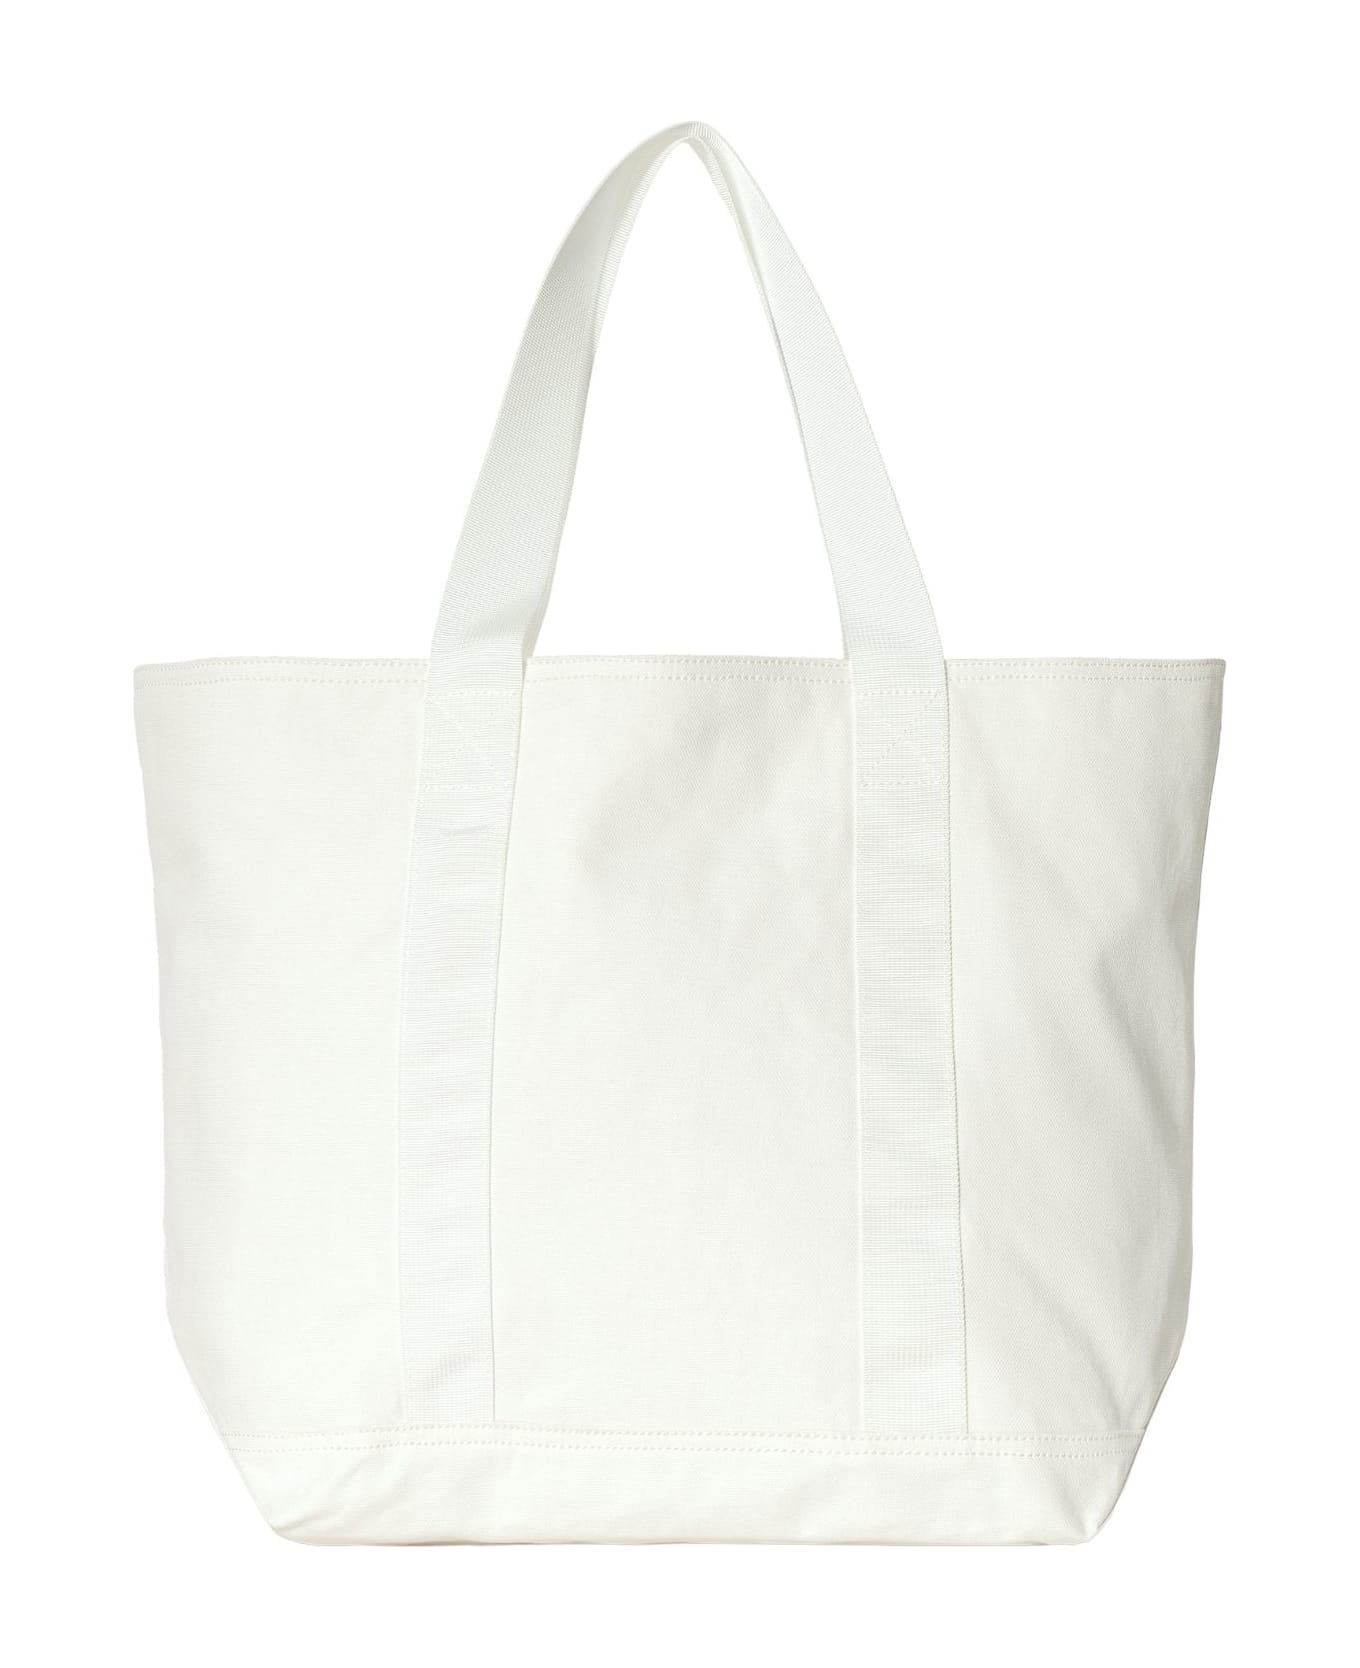 Carhartt Canvas Tote - Wax Rinsed